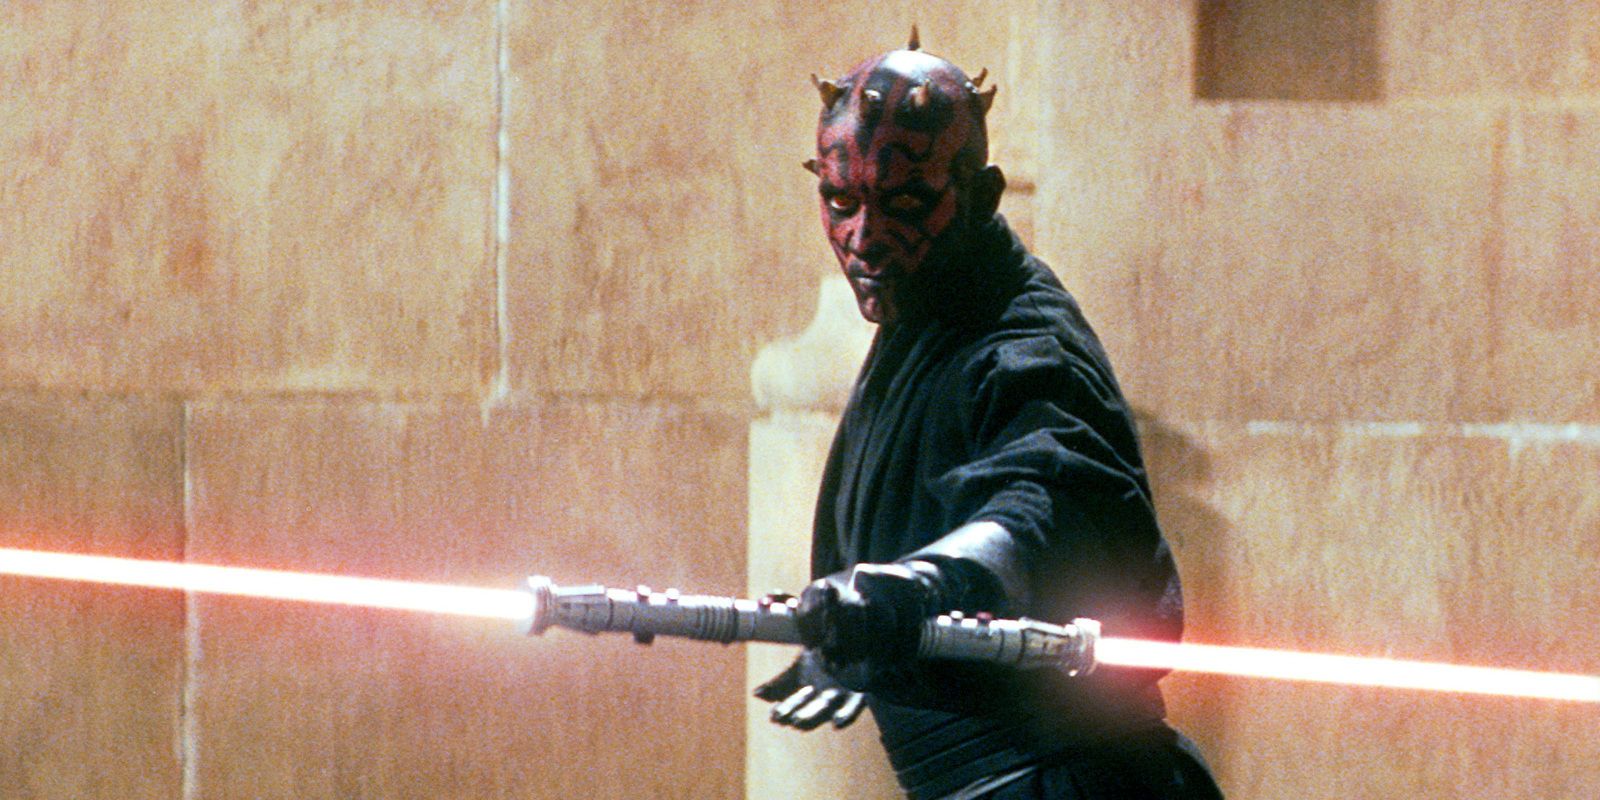 Darth Maul appears and prepares to do batle with Obi-Wan and Qui-Gon in The Phantom Menace